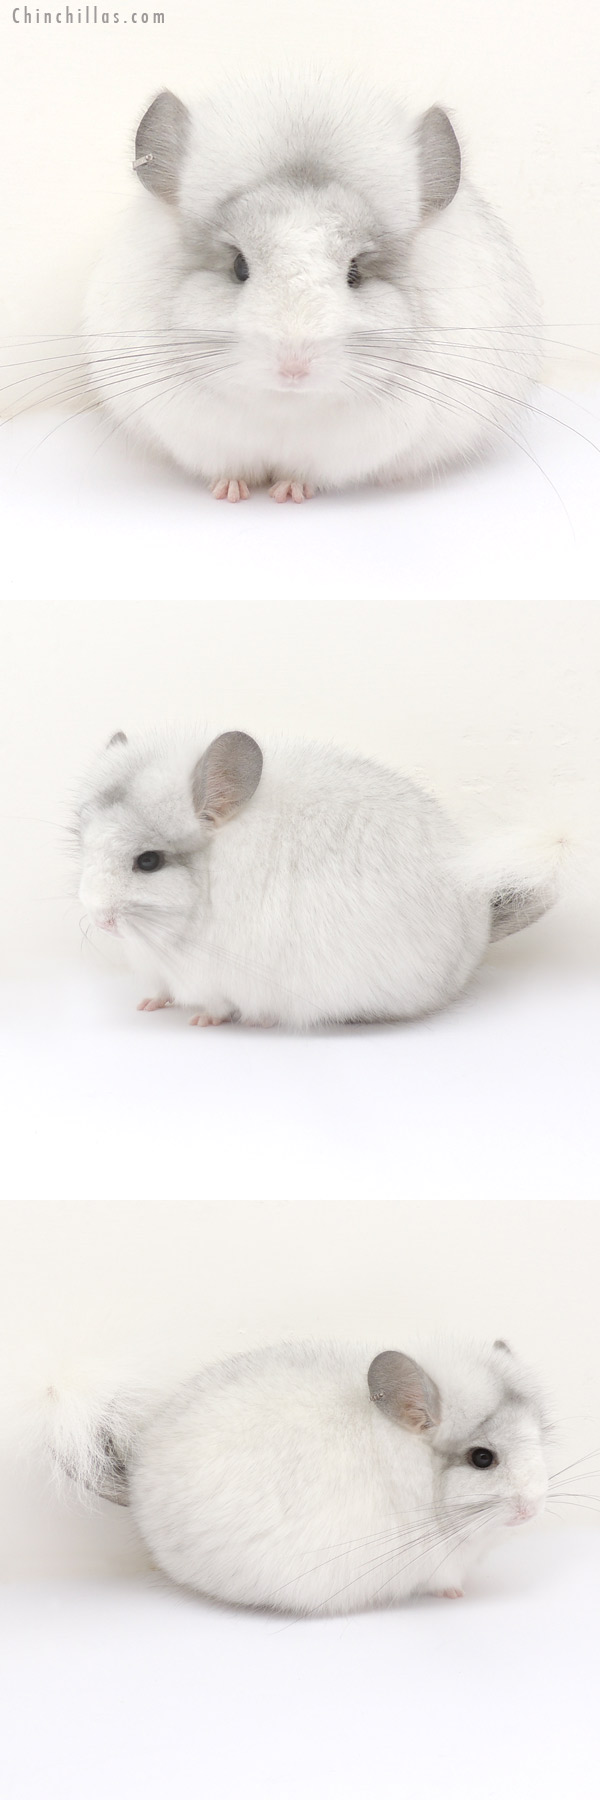 Chinchilla or related item offered for sale or export on Chinchillas.com - 13253 Exceptional White Mosaic Royal Persian Angora Female Chinchilla